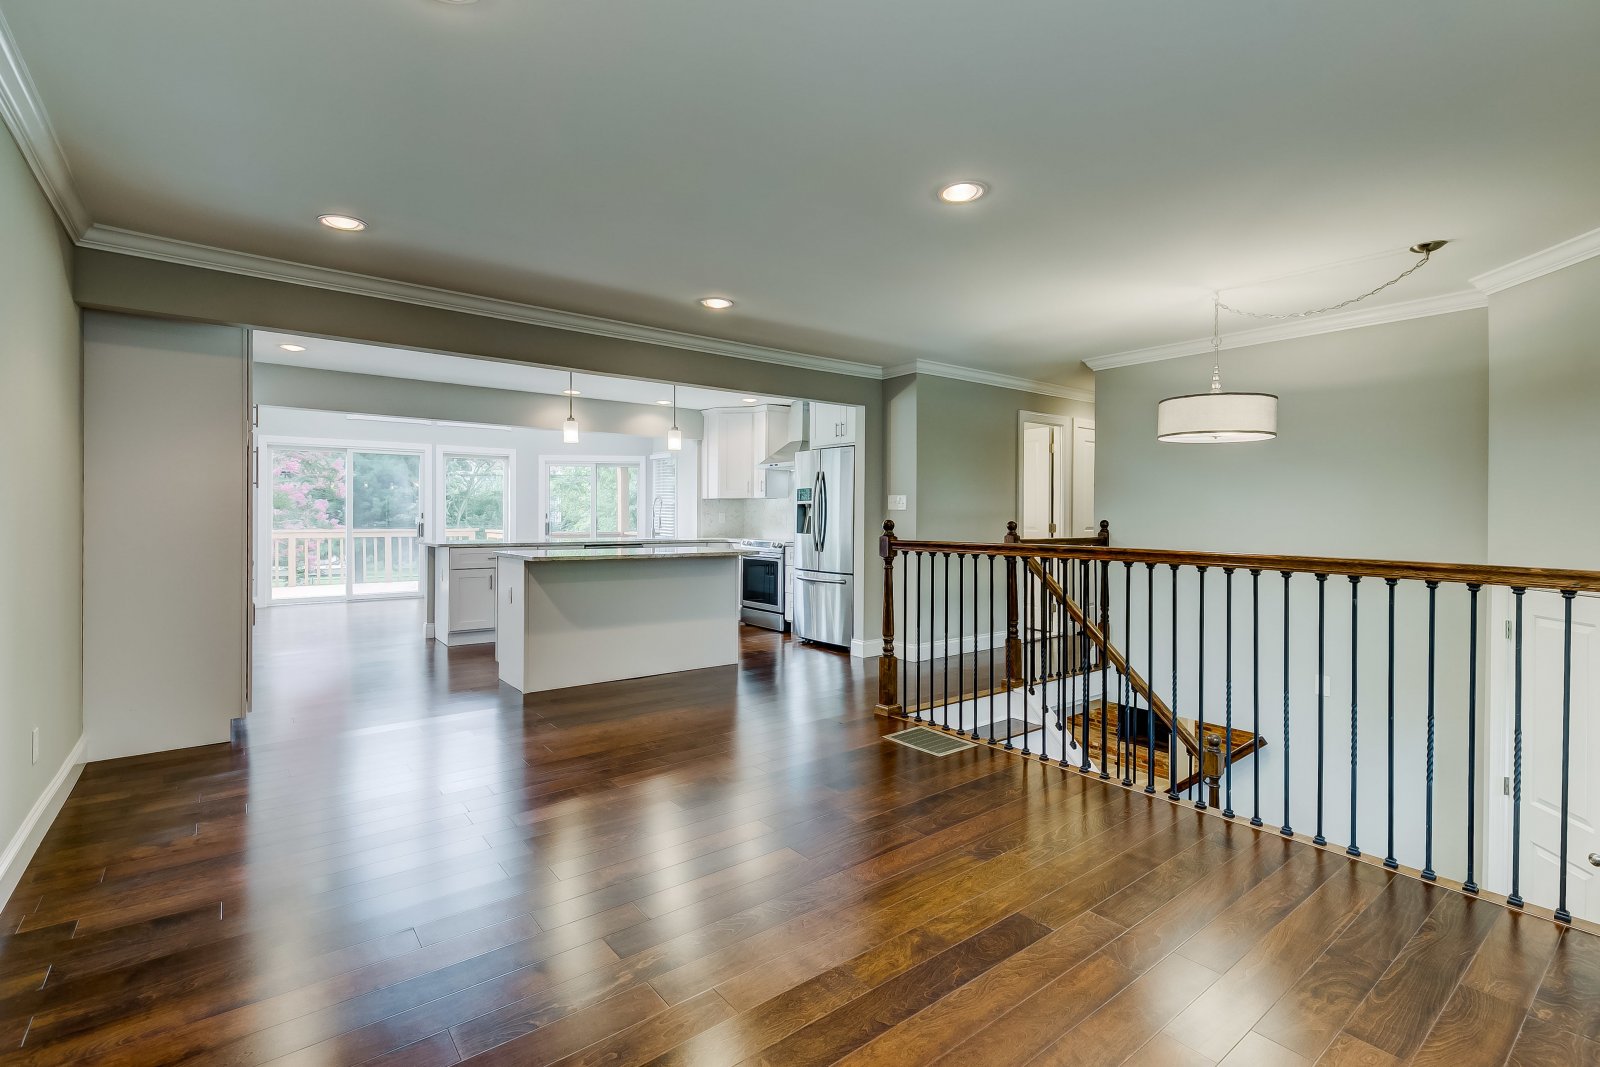 We used a support beam to create an open concept main floor at 625 Edwards Rd